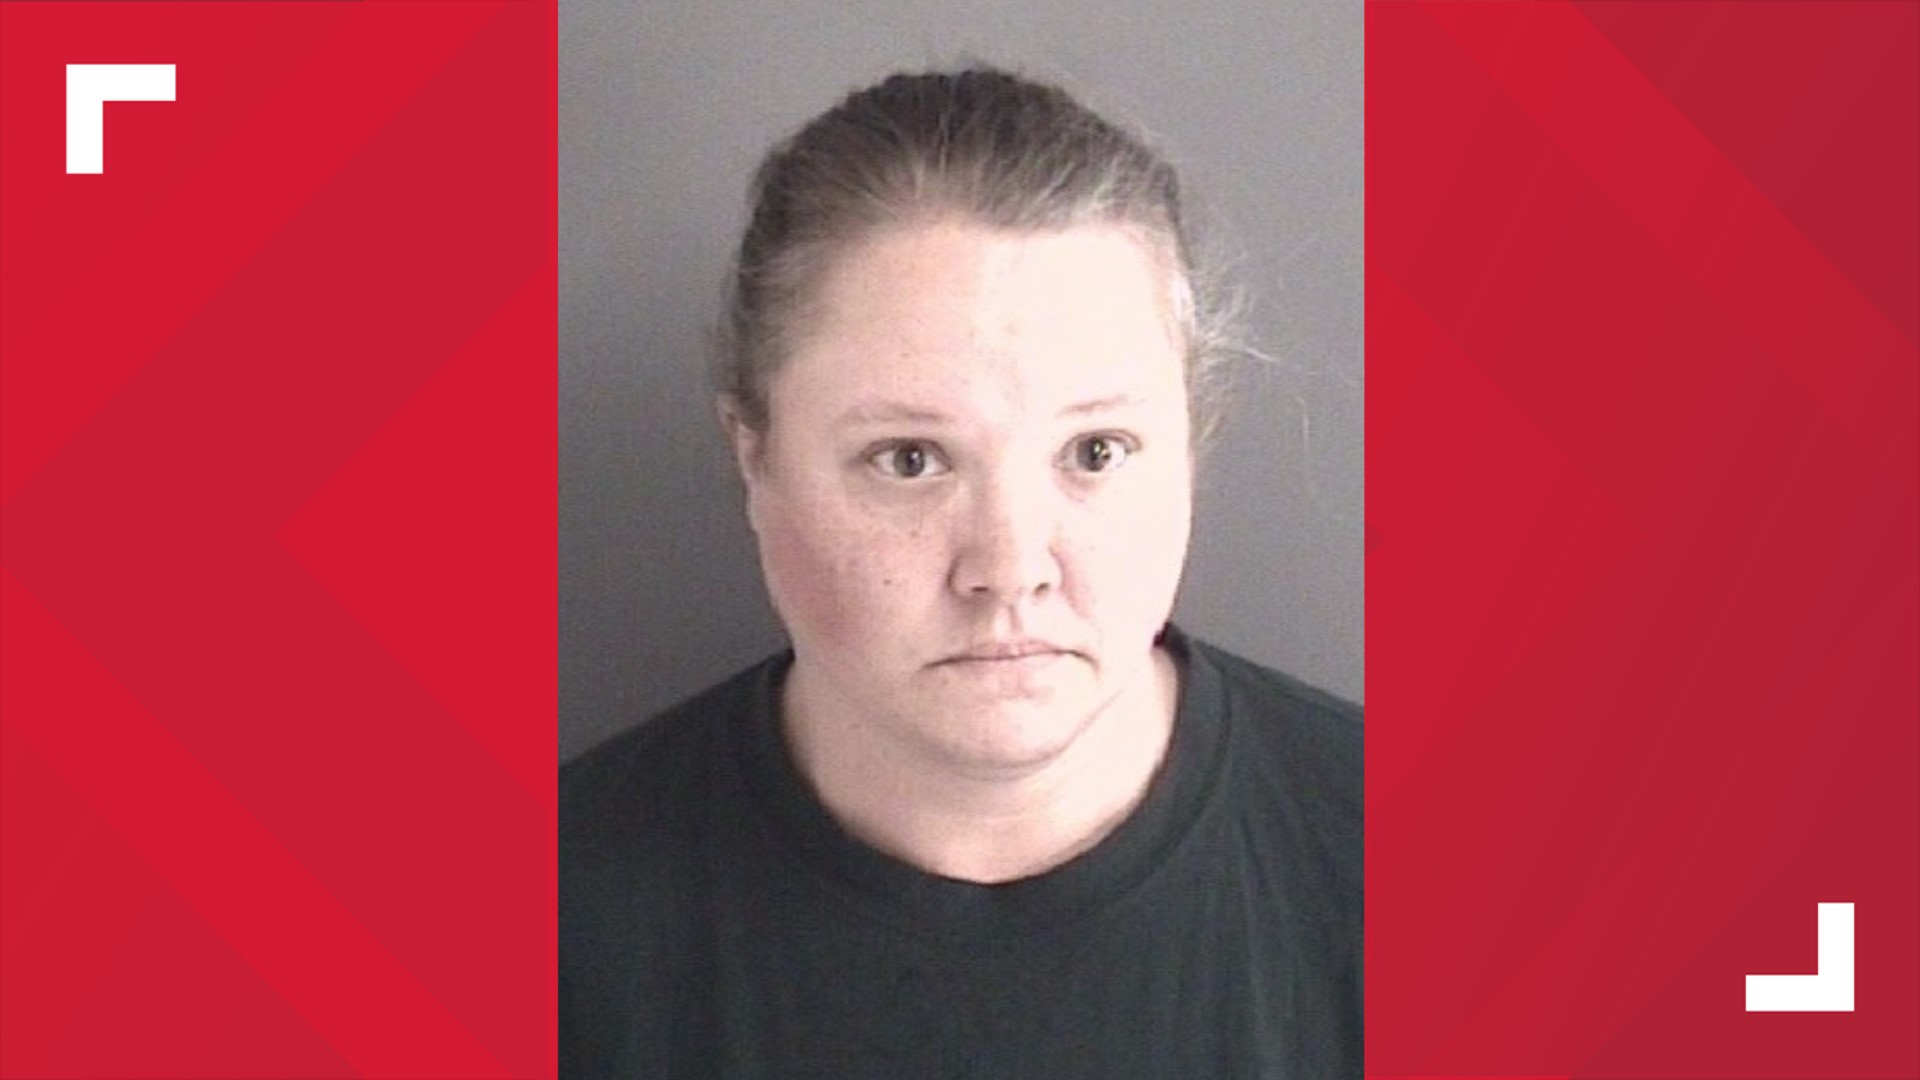 44-year-old Bambi Ann Cerka stole nearly $28,000 from four nursing home residents using her access to their personal information, court documents claim.